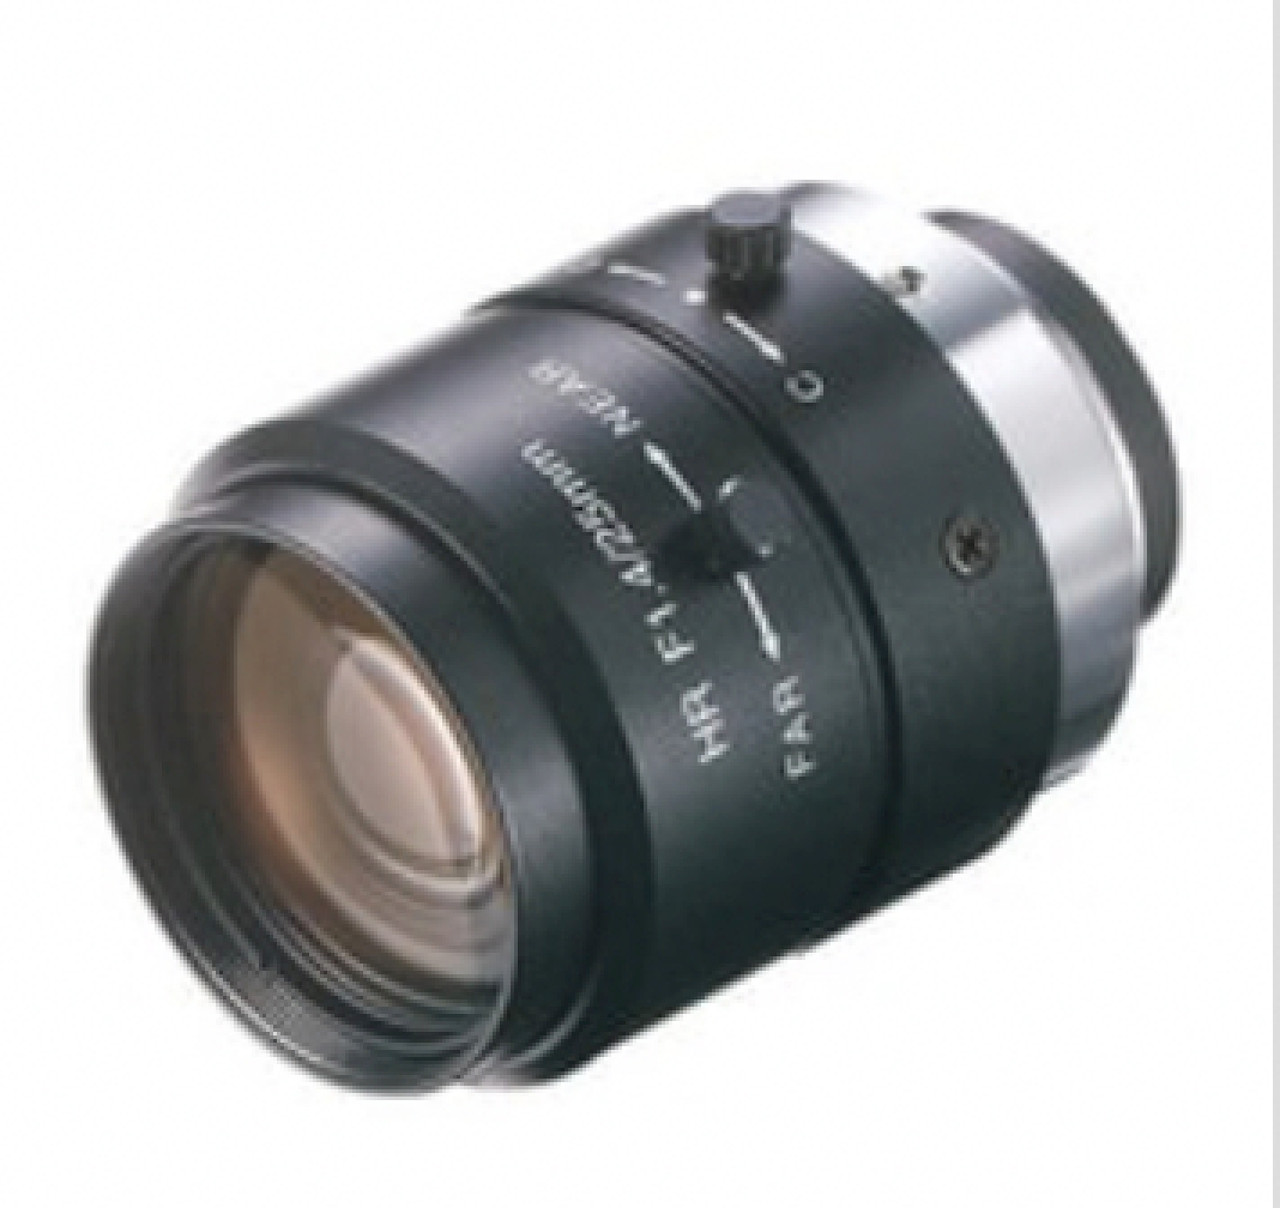 Keyence CA-LH25 Lenses (for Machine Vision), High-resolution Low-Distortion Lens, 25 mm [New]